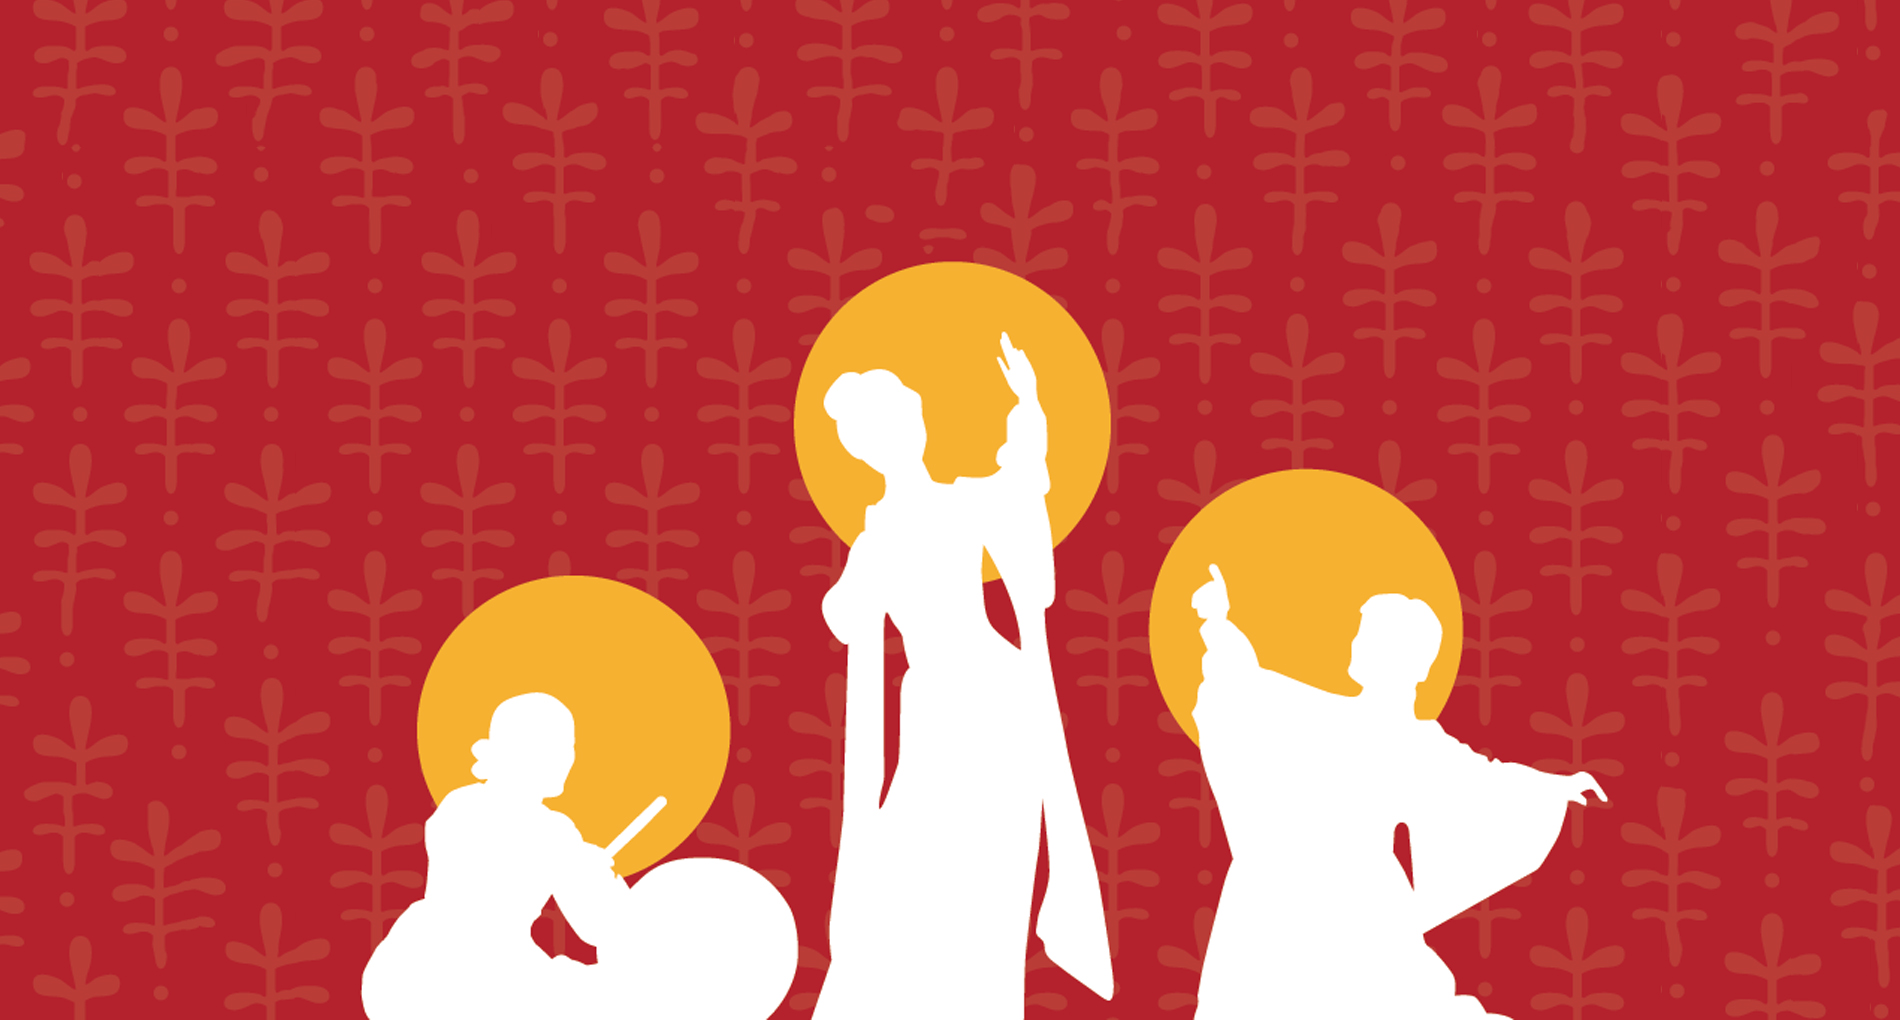 illustration of three white silhouettes on yellow circles on red background